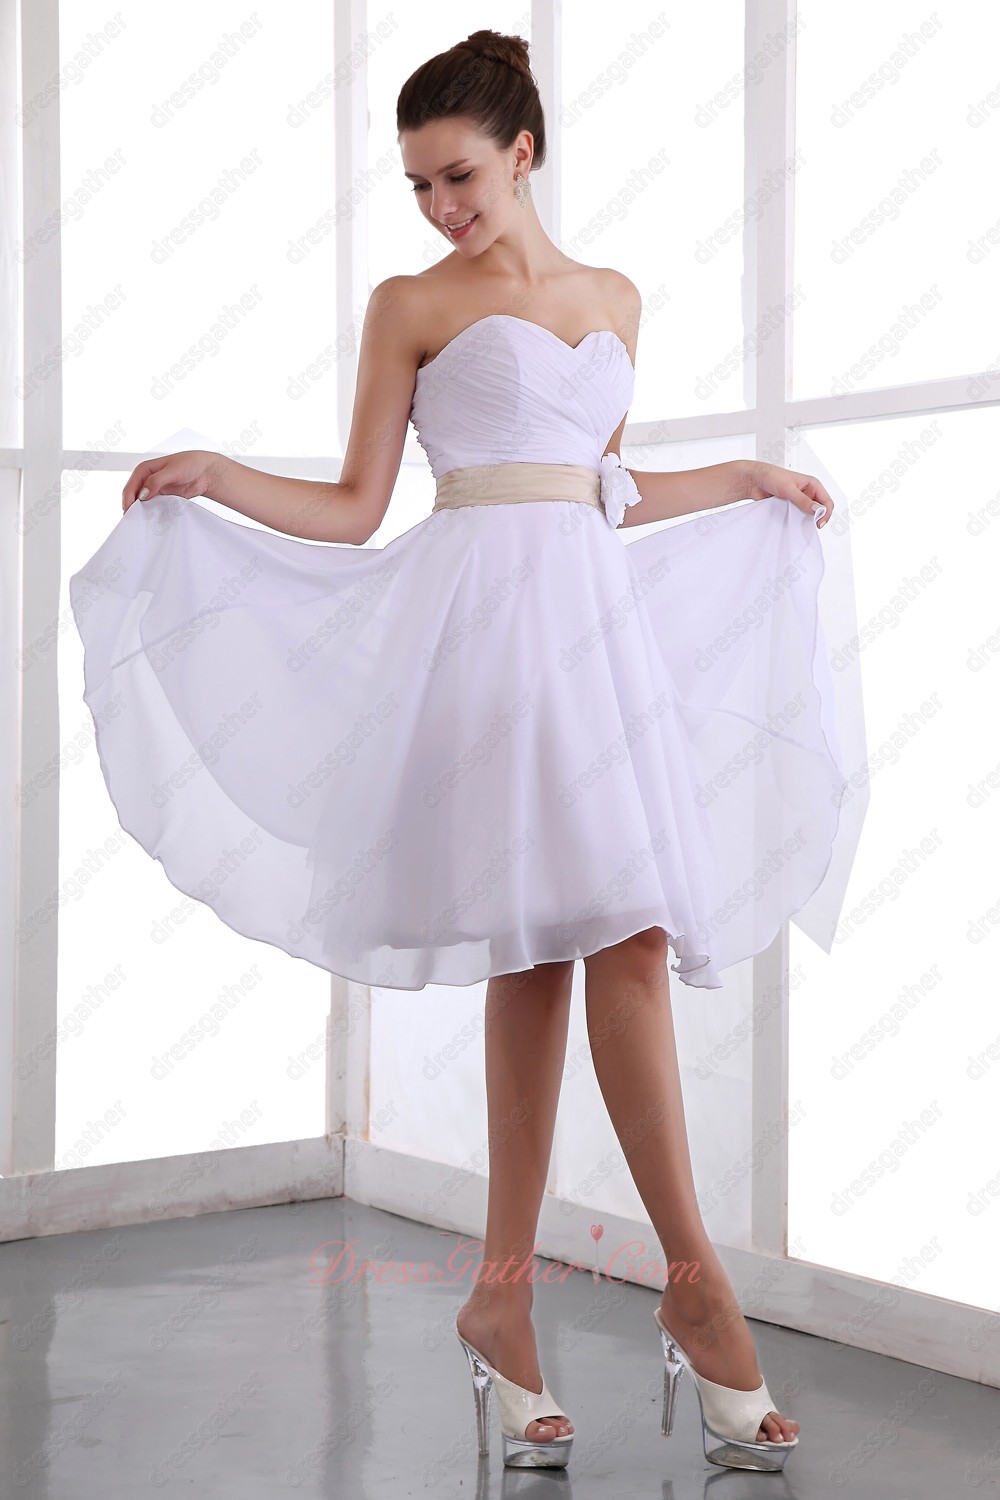 Crossed Pleating Knee Length Chiffon Skirt Bridesmaid Dress White With Champagne Belt - Click Image to Close